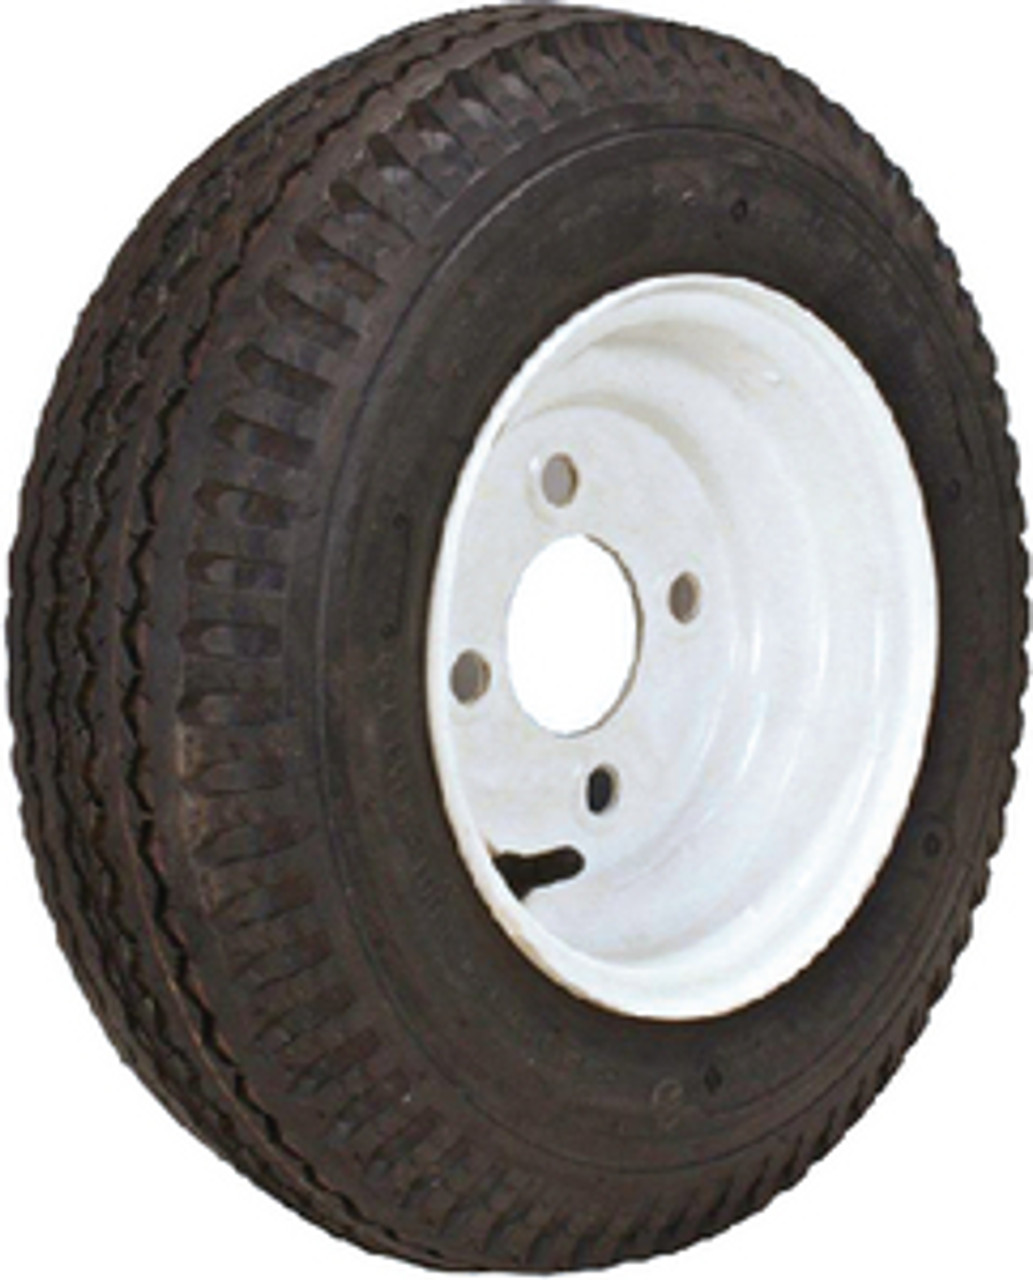 LOADSTAR - 8" BIAS TIRE AND WHEEL ASSEMBLY - Tire: 480-8 K371 Bolt Pattern: 4 on 4" Wheel: Solid Finish: White Load Range: C Ply: 6 Max Load: 745 lbs.